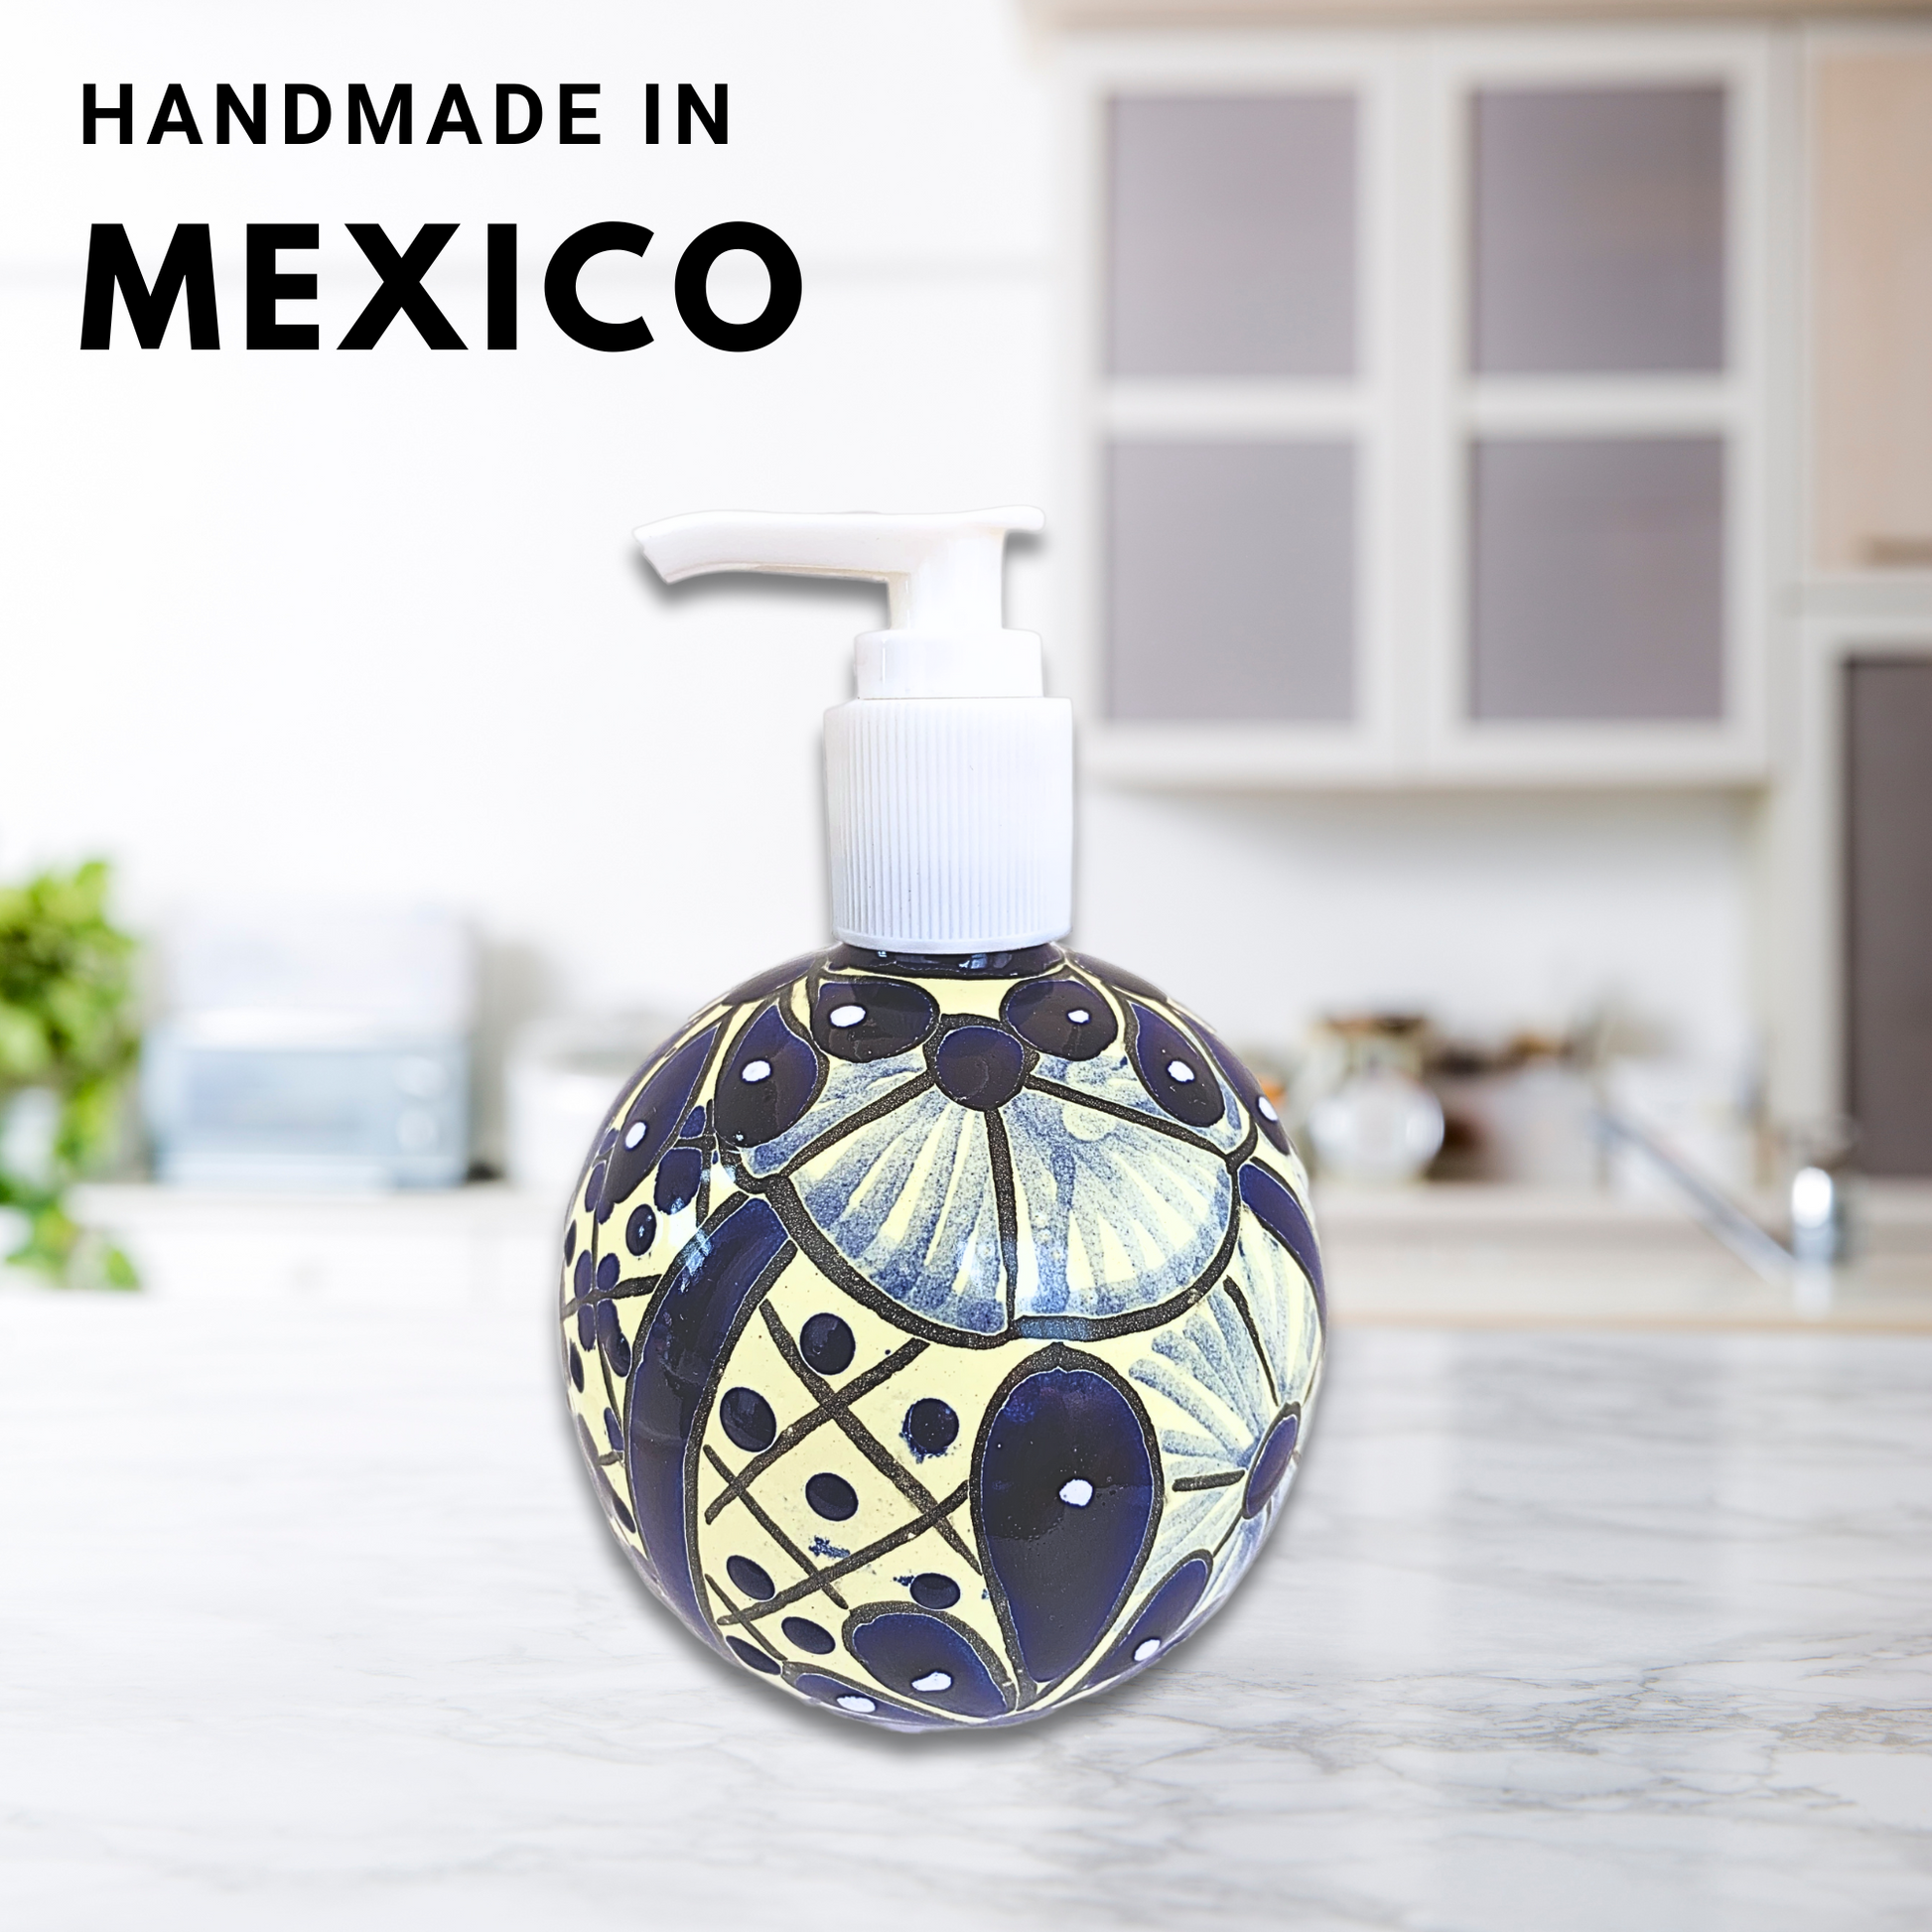 A spherical soap dispenser, hand-painted in blue and white Talavera design, adding a vibrant touch to any kitchen or bathroom.